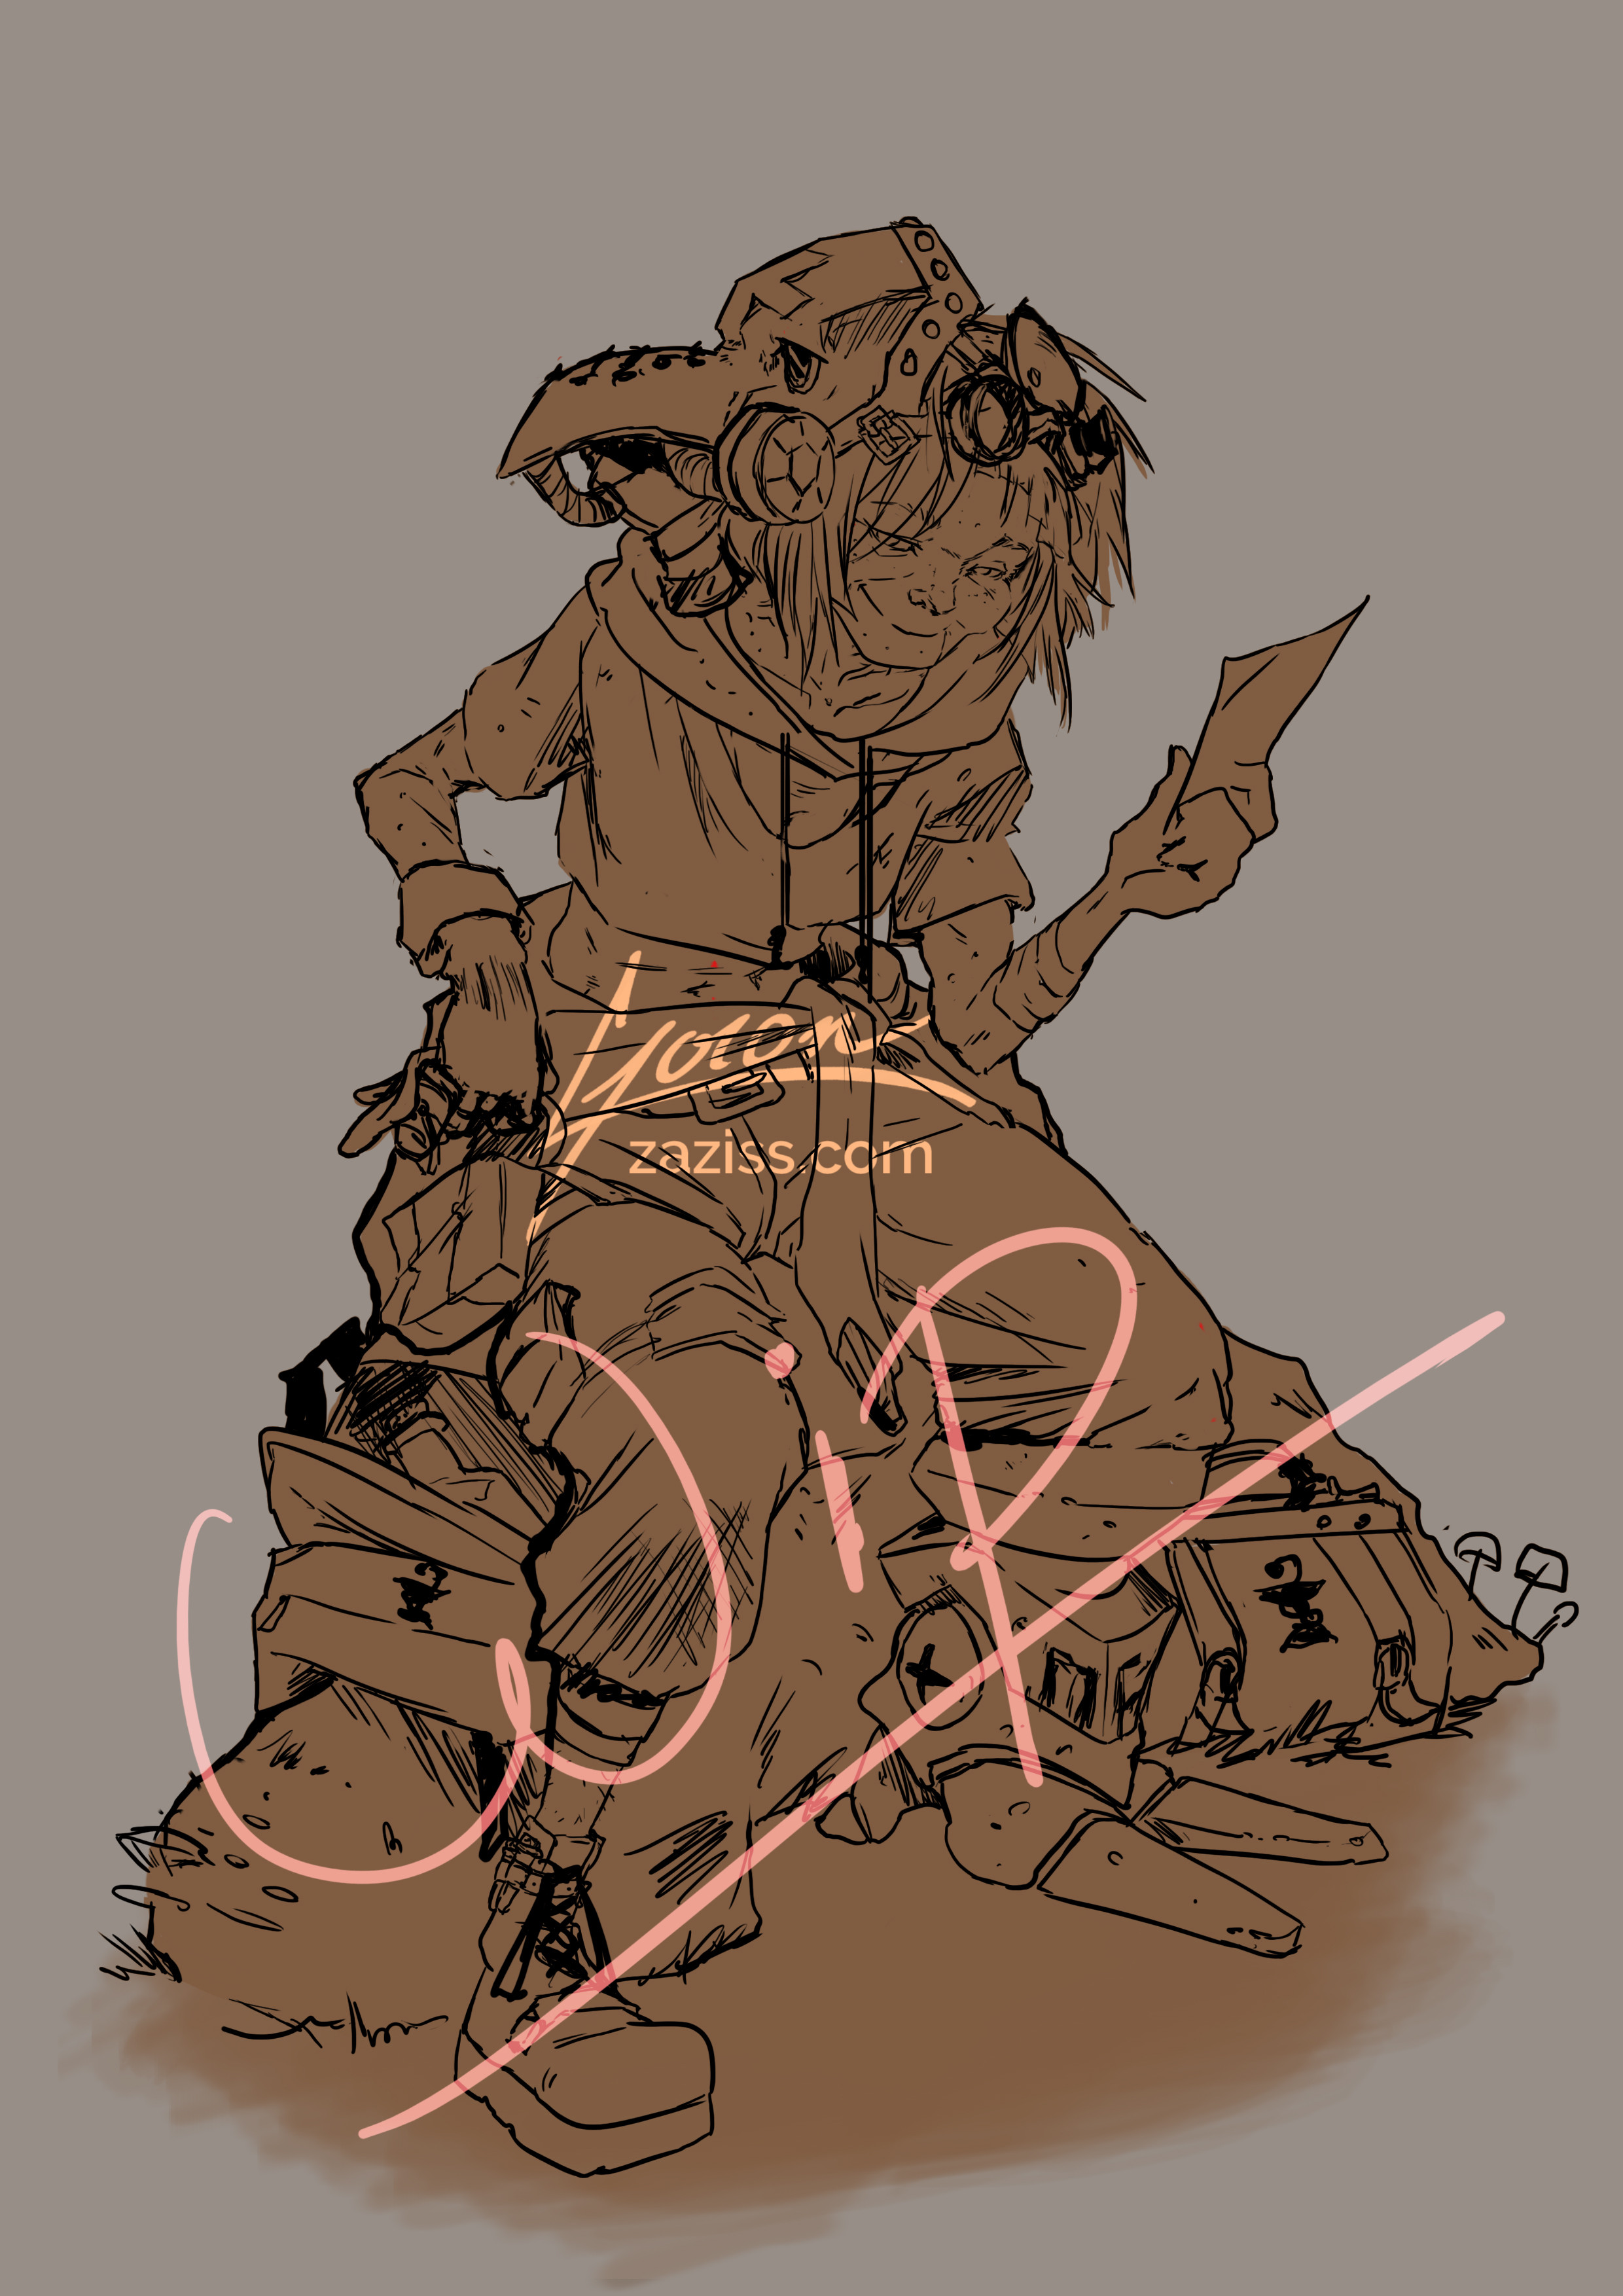 [WIP]
Rough lineart